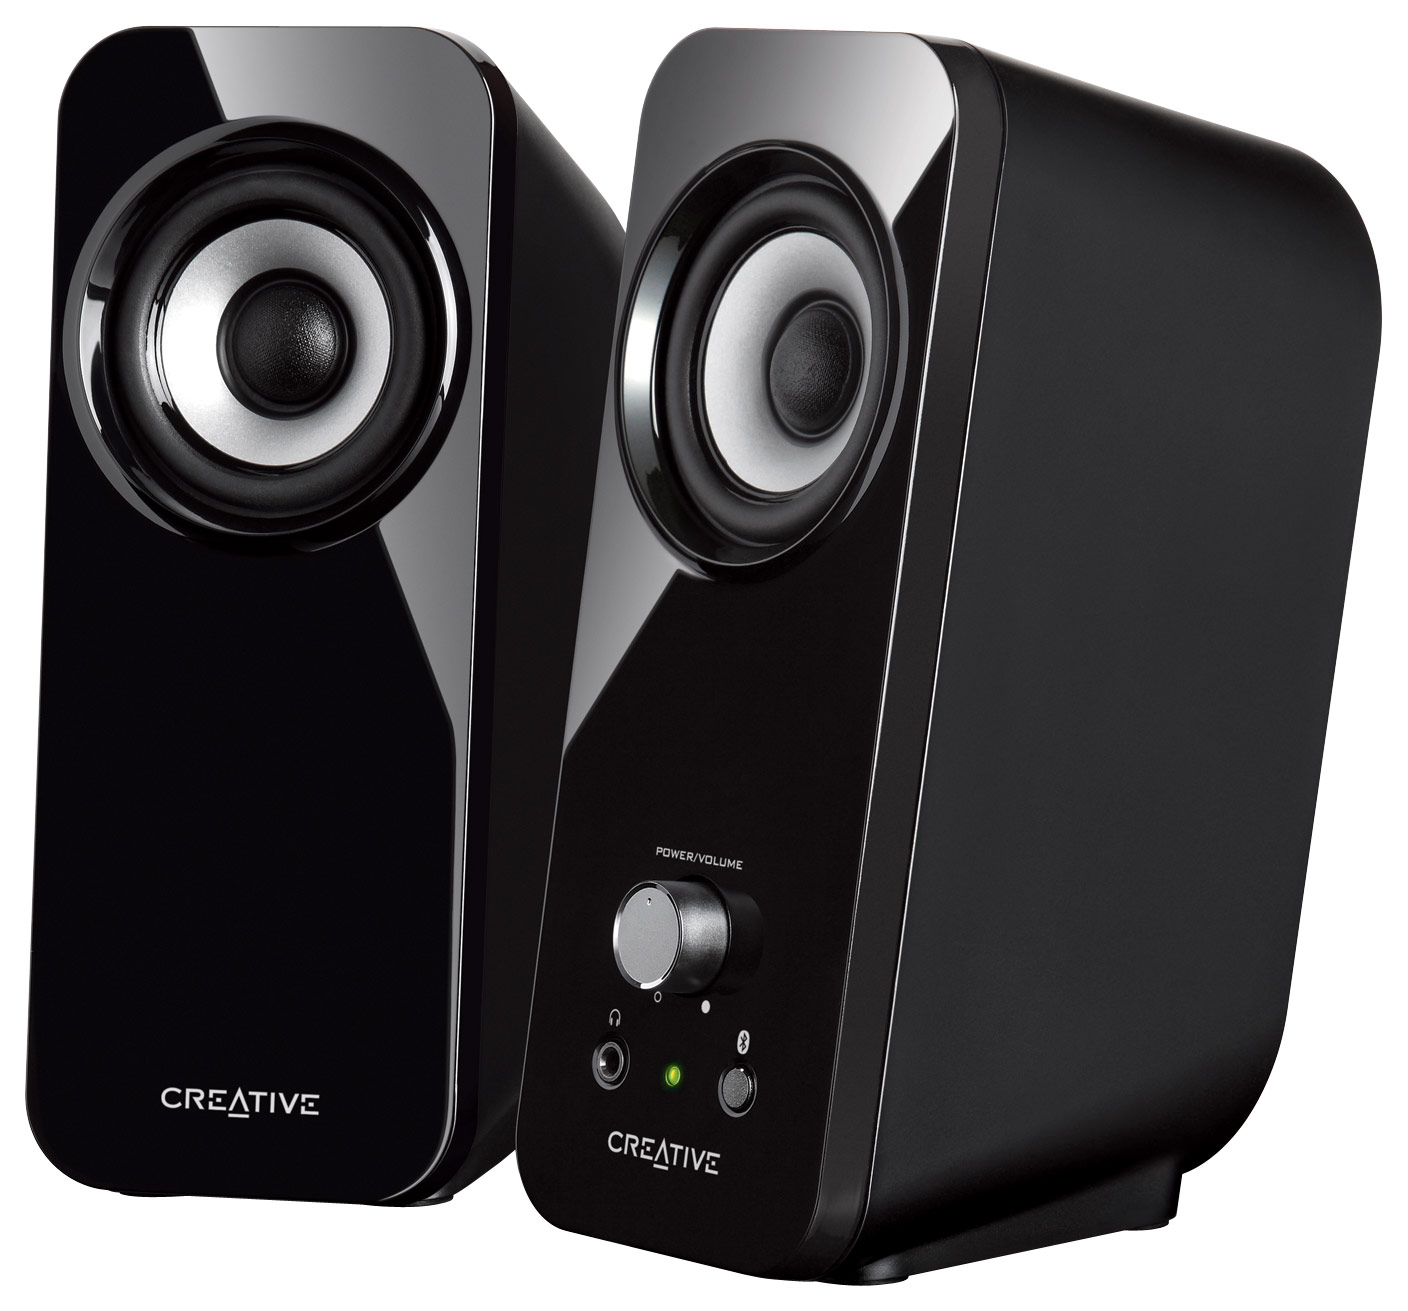 Creative T4 wireless 2.1 speaker system Reviews, Pros and Cons - TechSpot